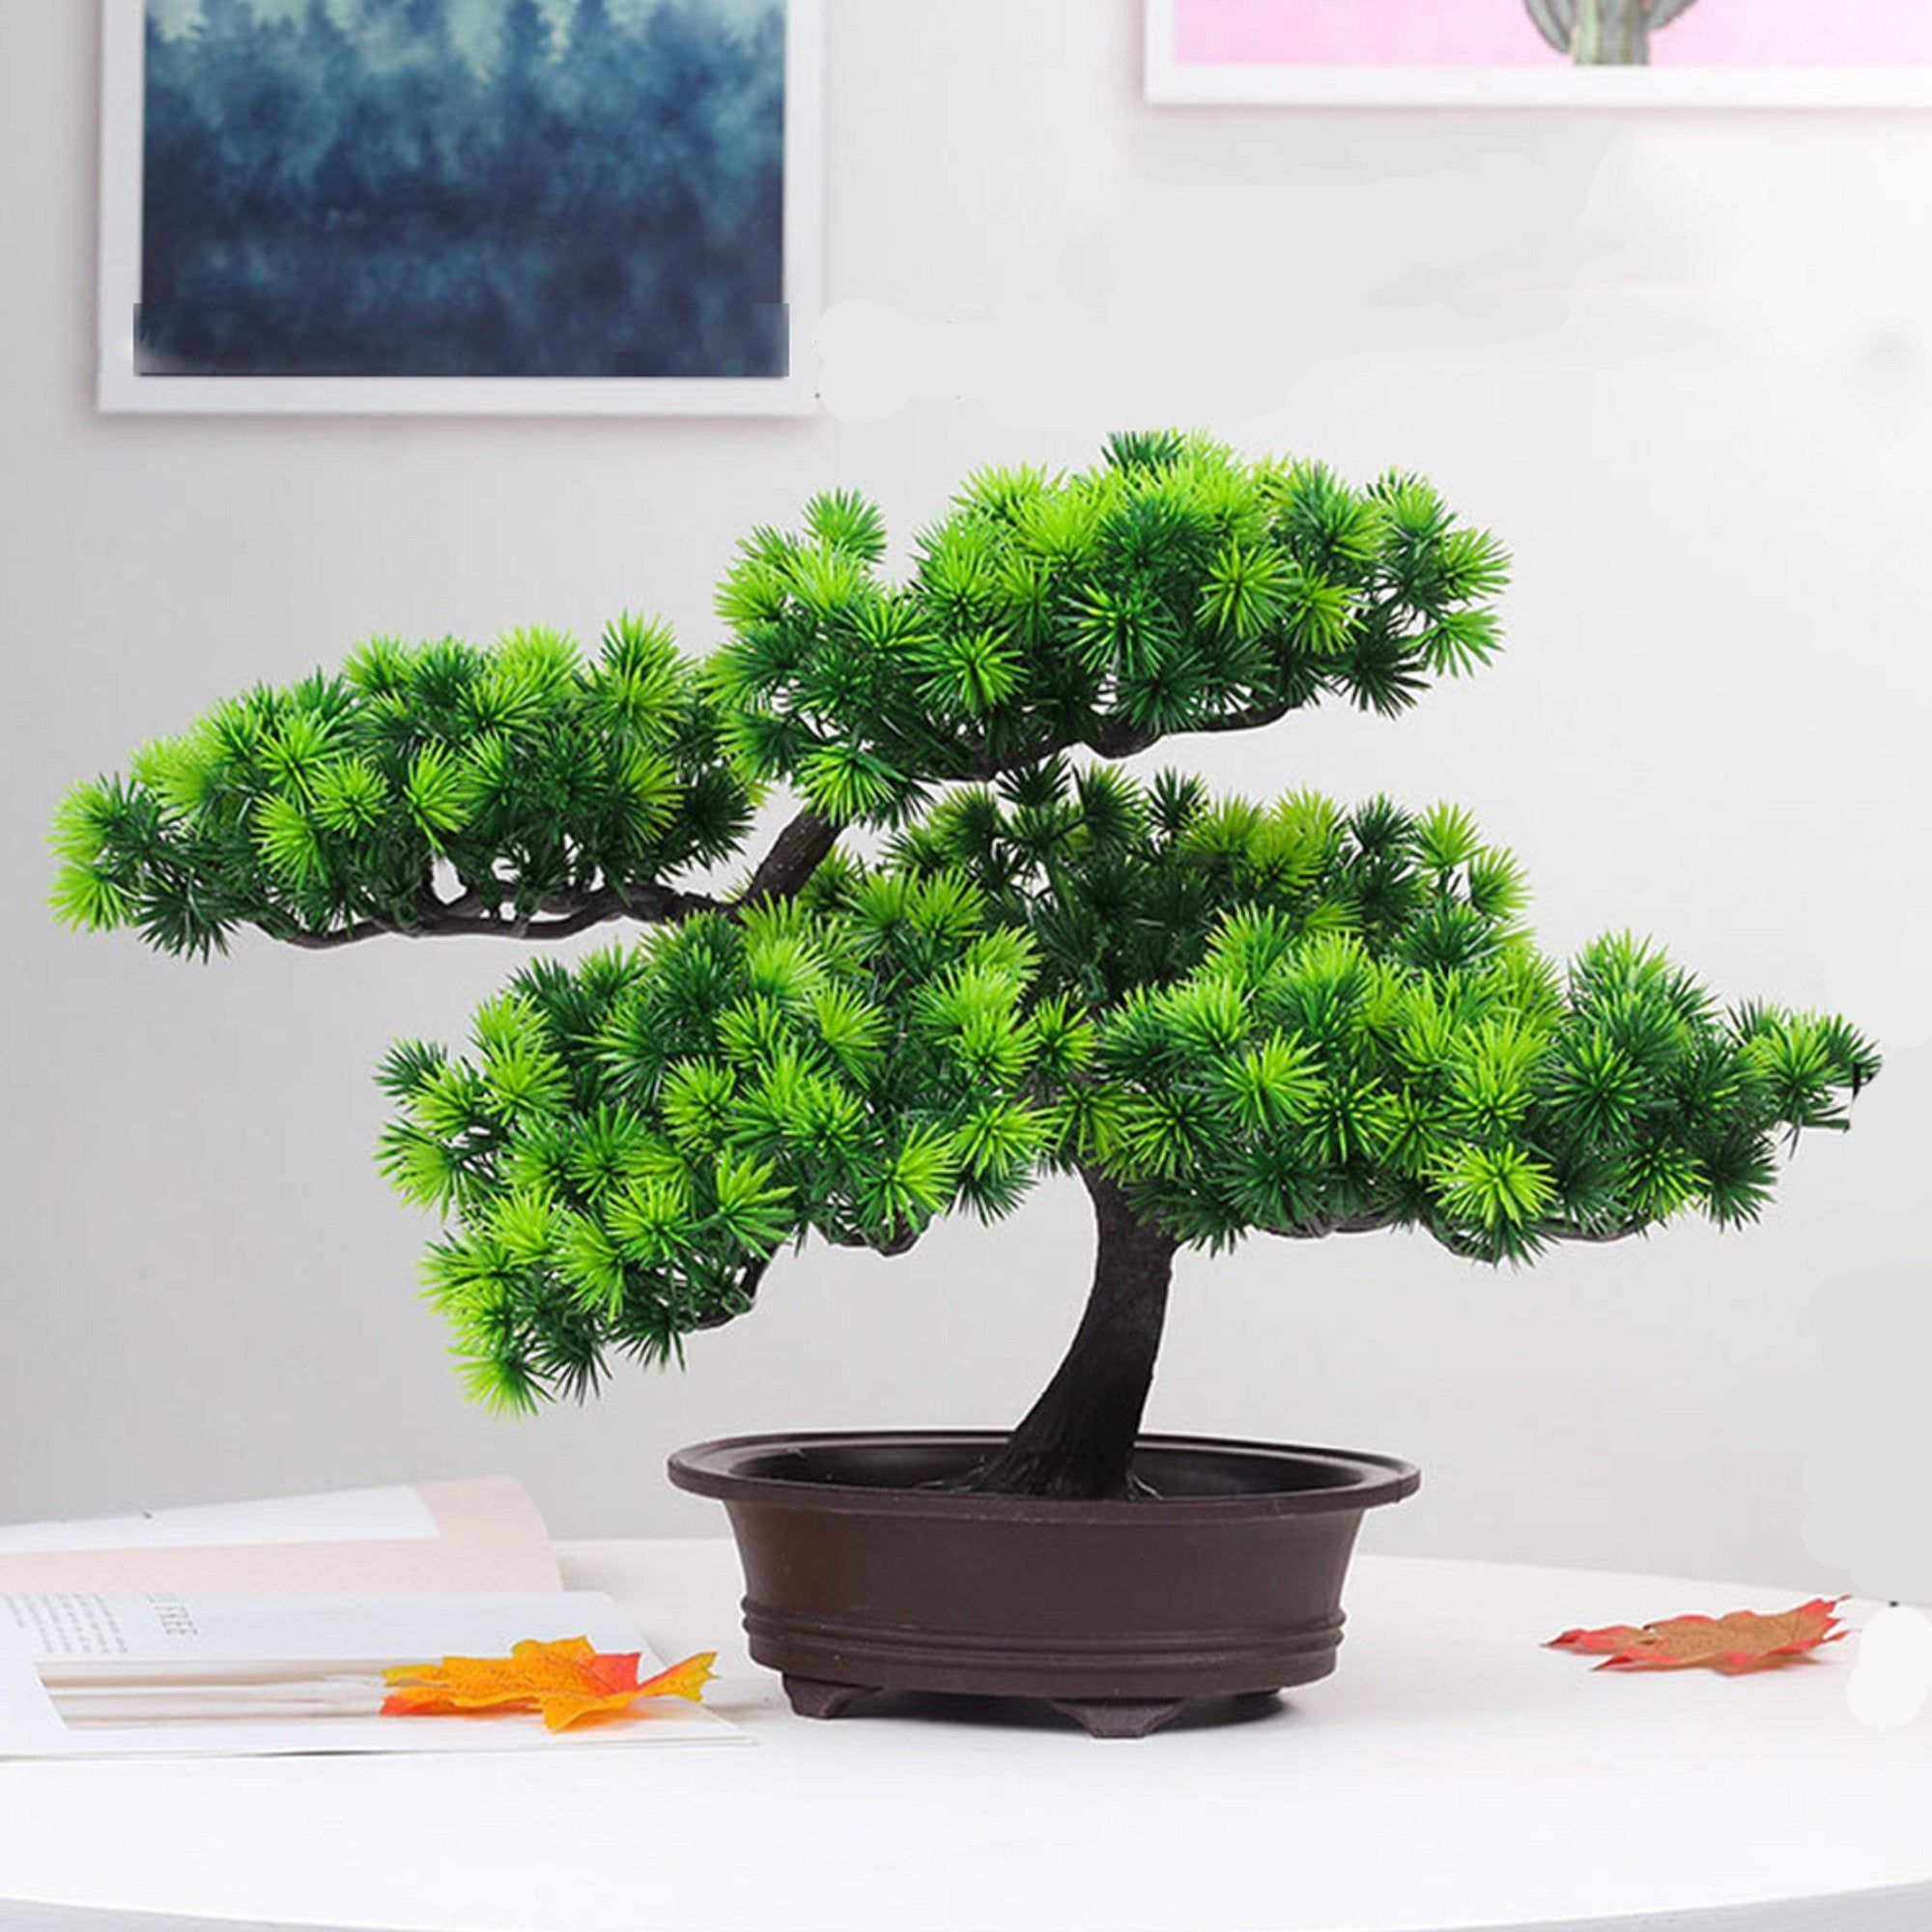 Recoproqfje Artificial Potted Plant Ornament Welcoming Pine Shape Bonsai Simulation Home Decor